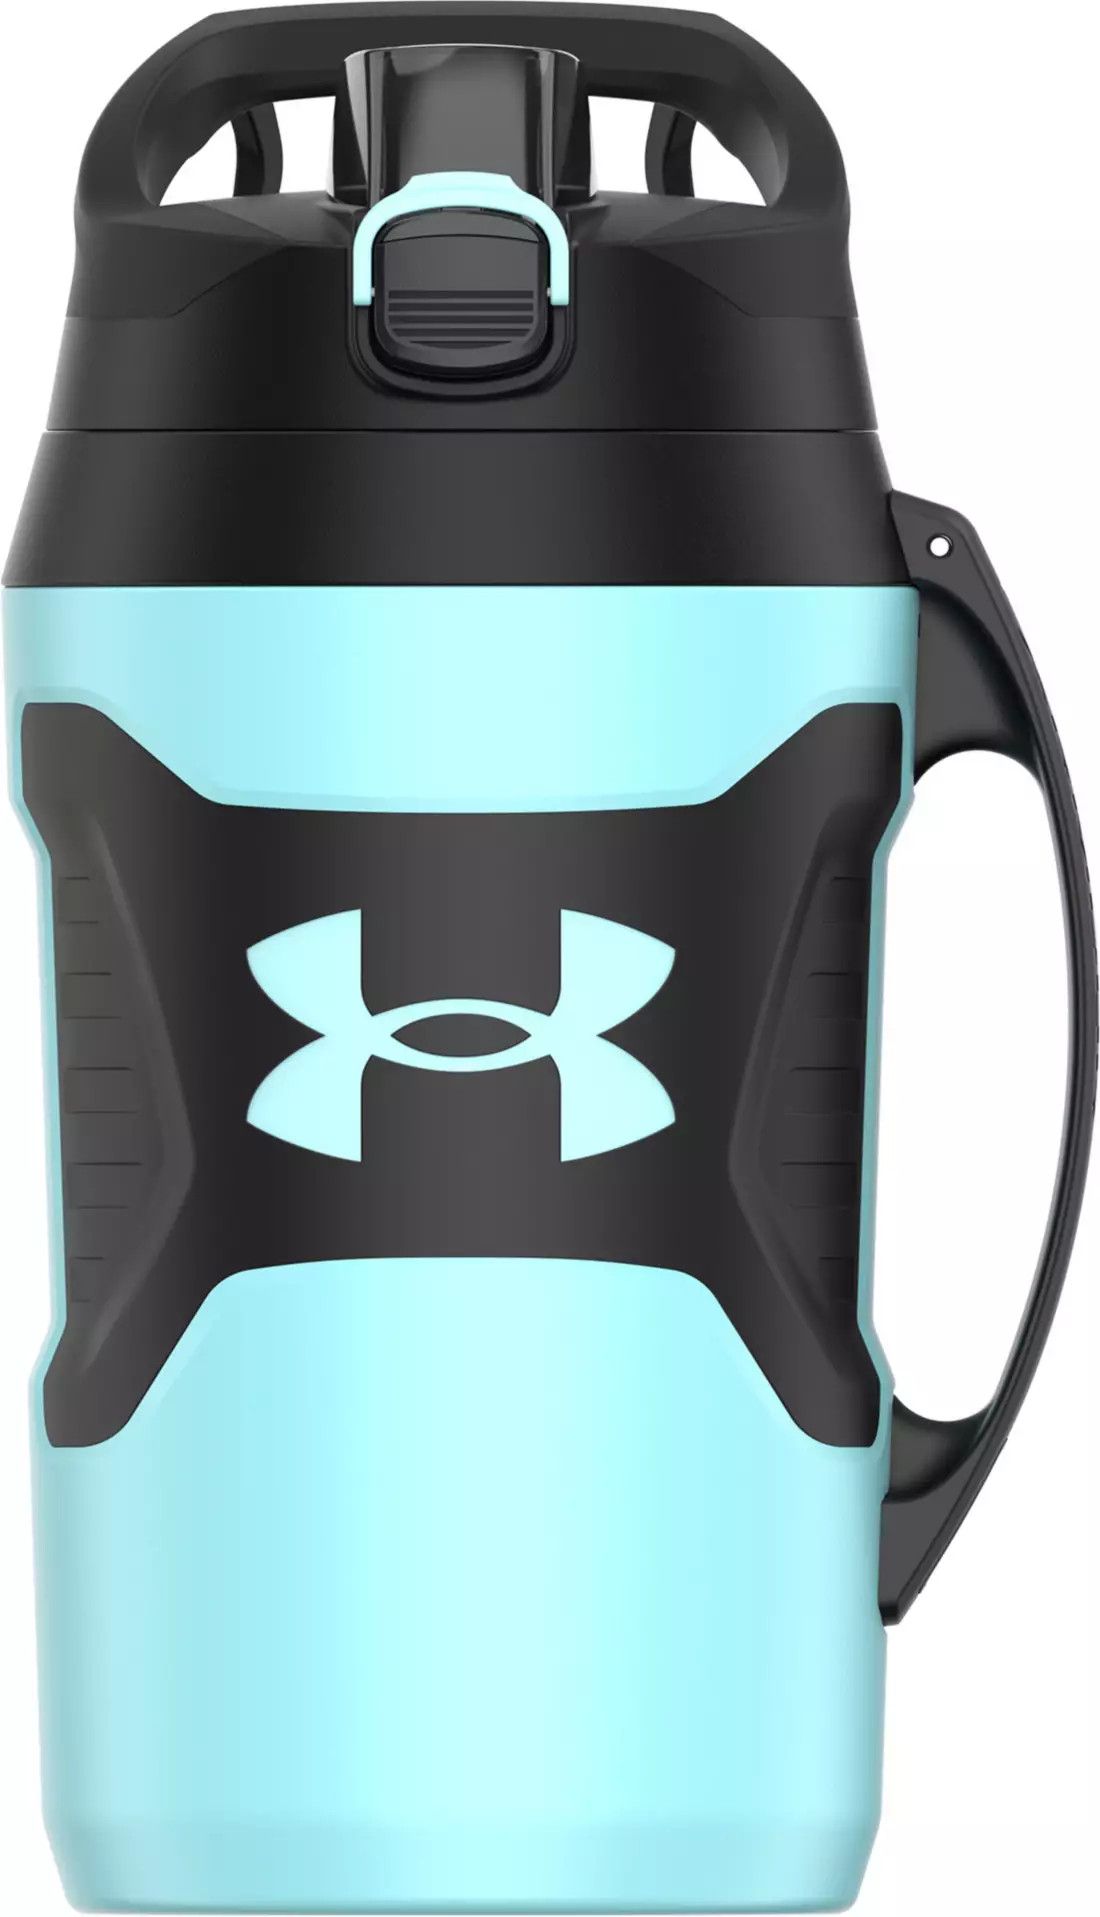 Under Armour Playmaker Jug 64 oz. Water Bottle | Dick's Sporting Goods